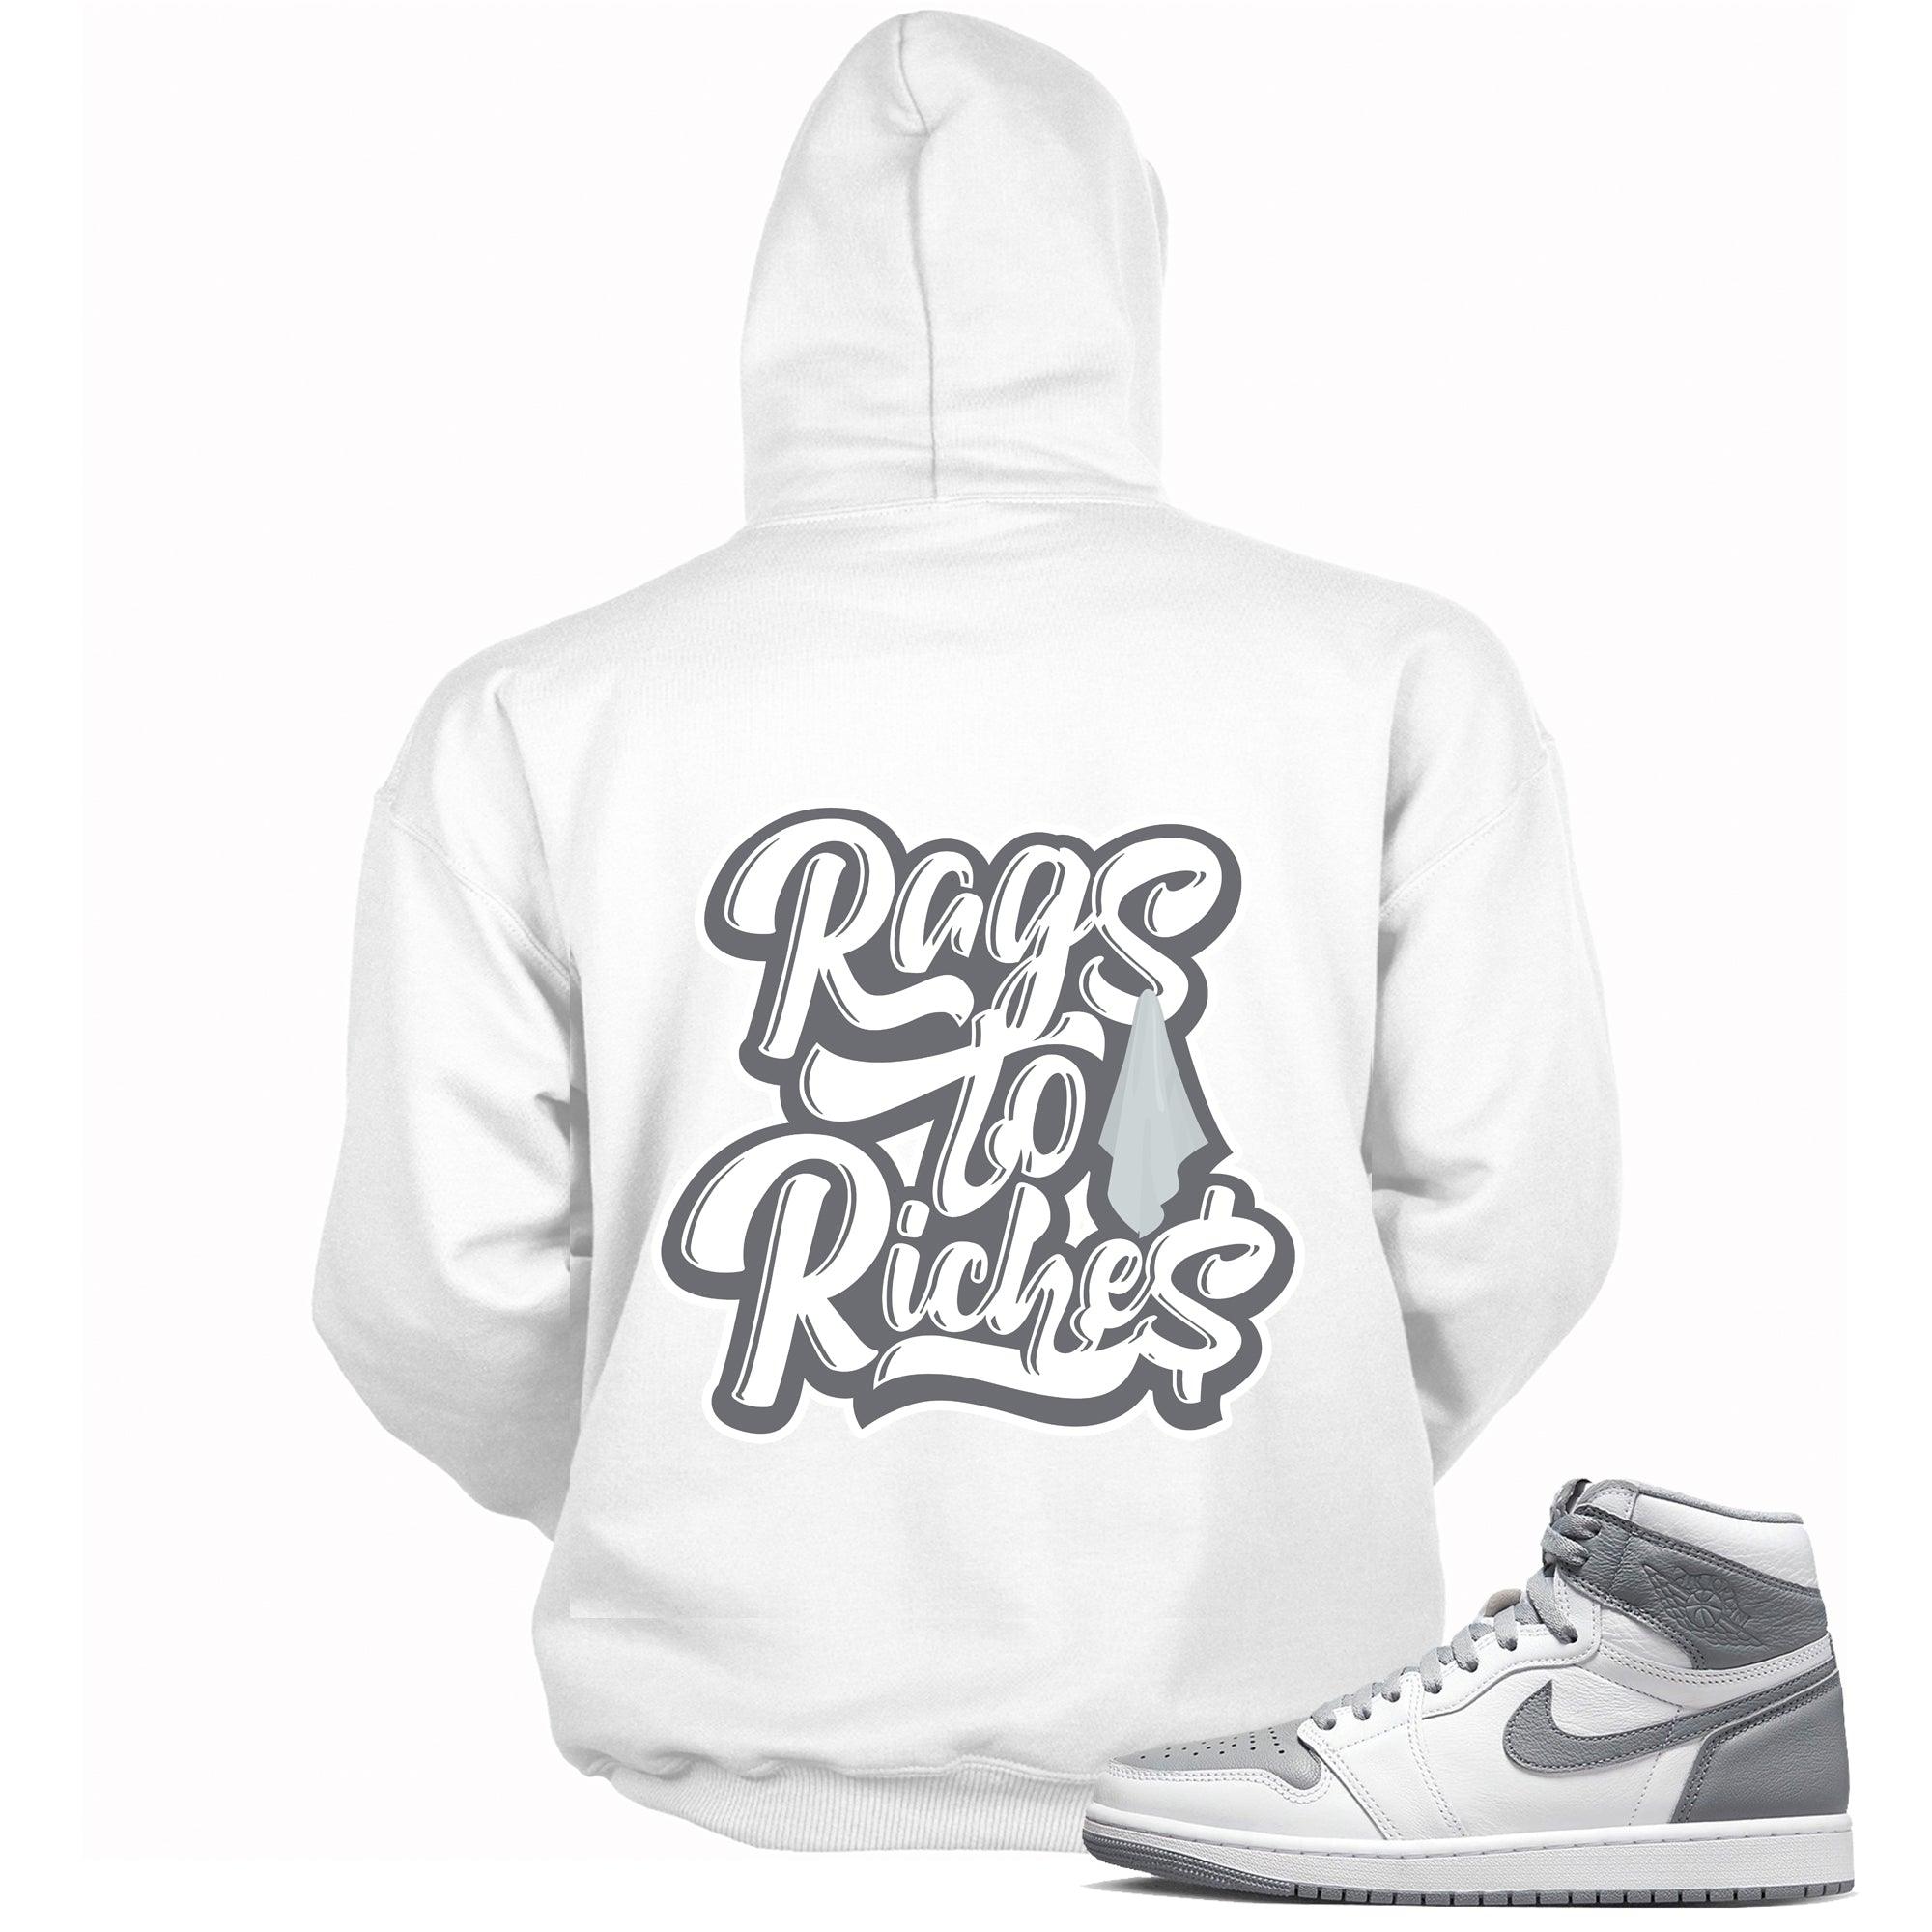 Rags to Riches Hoodie for Jordan 1s photo